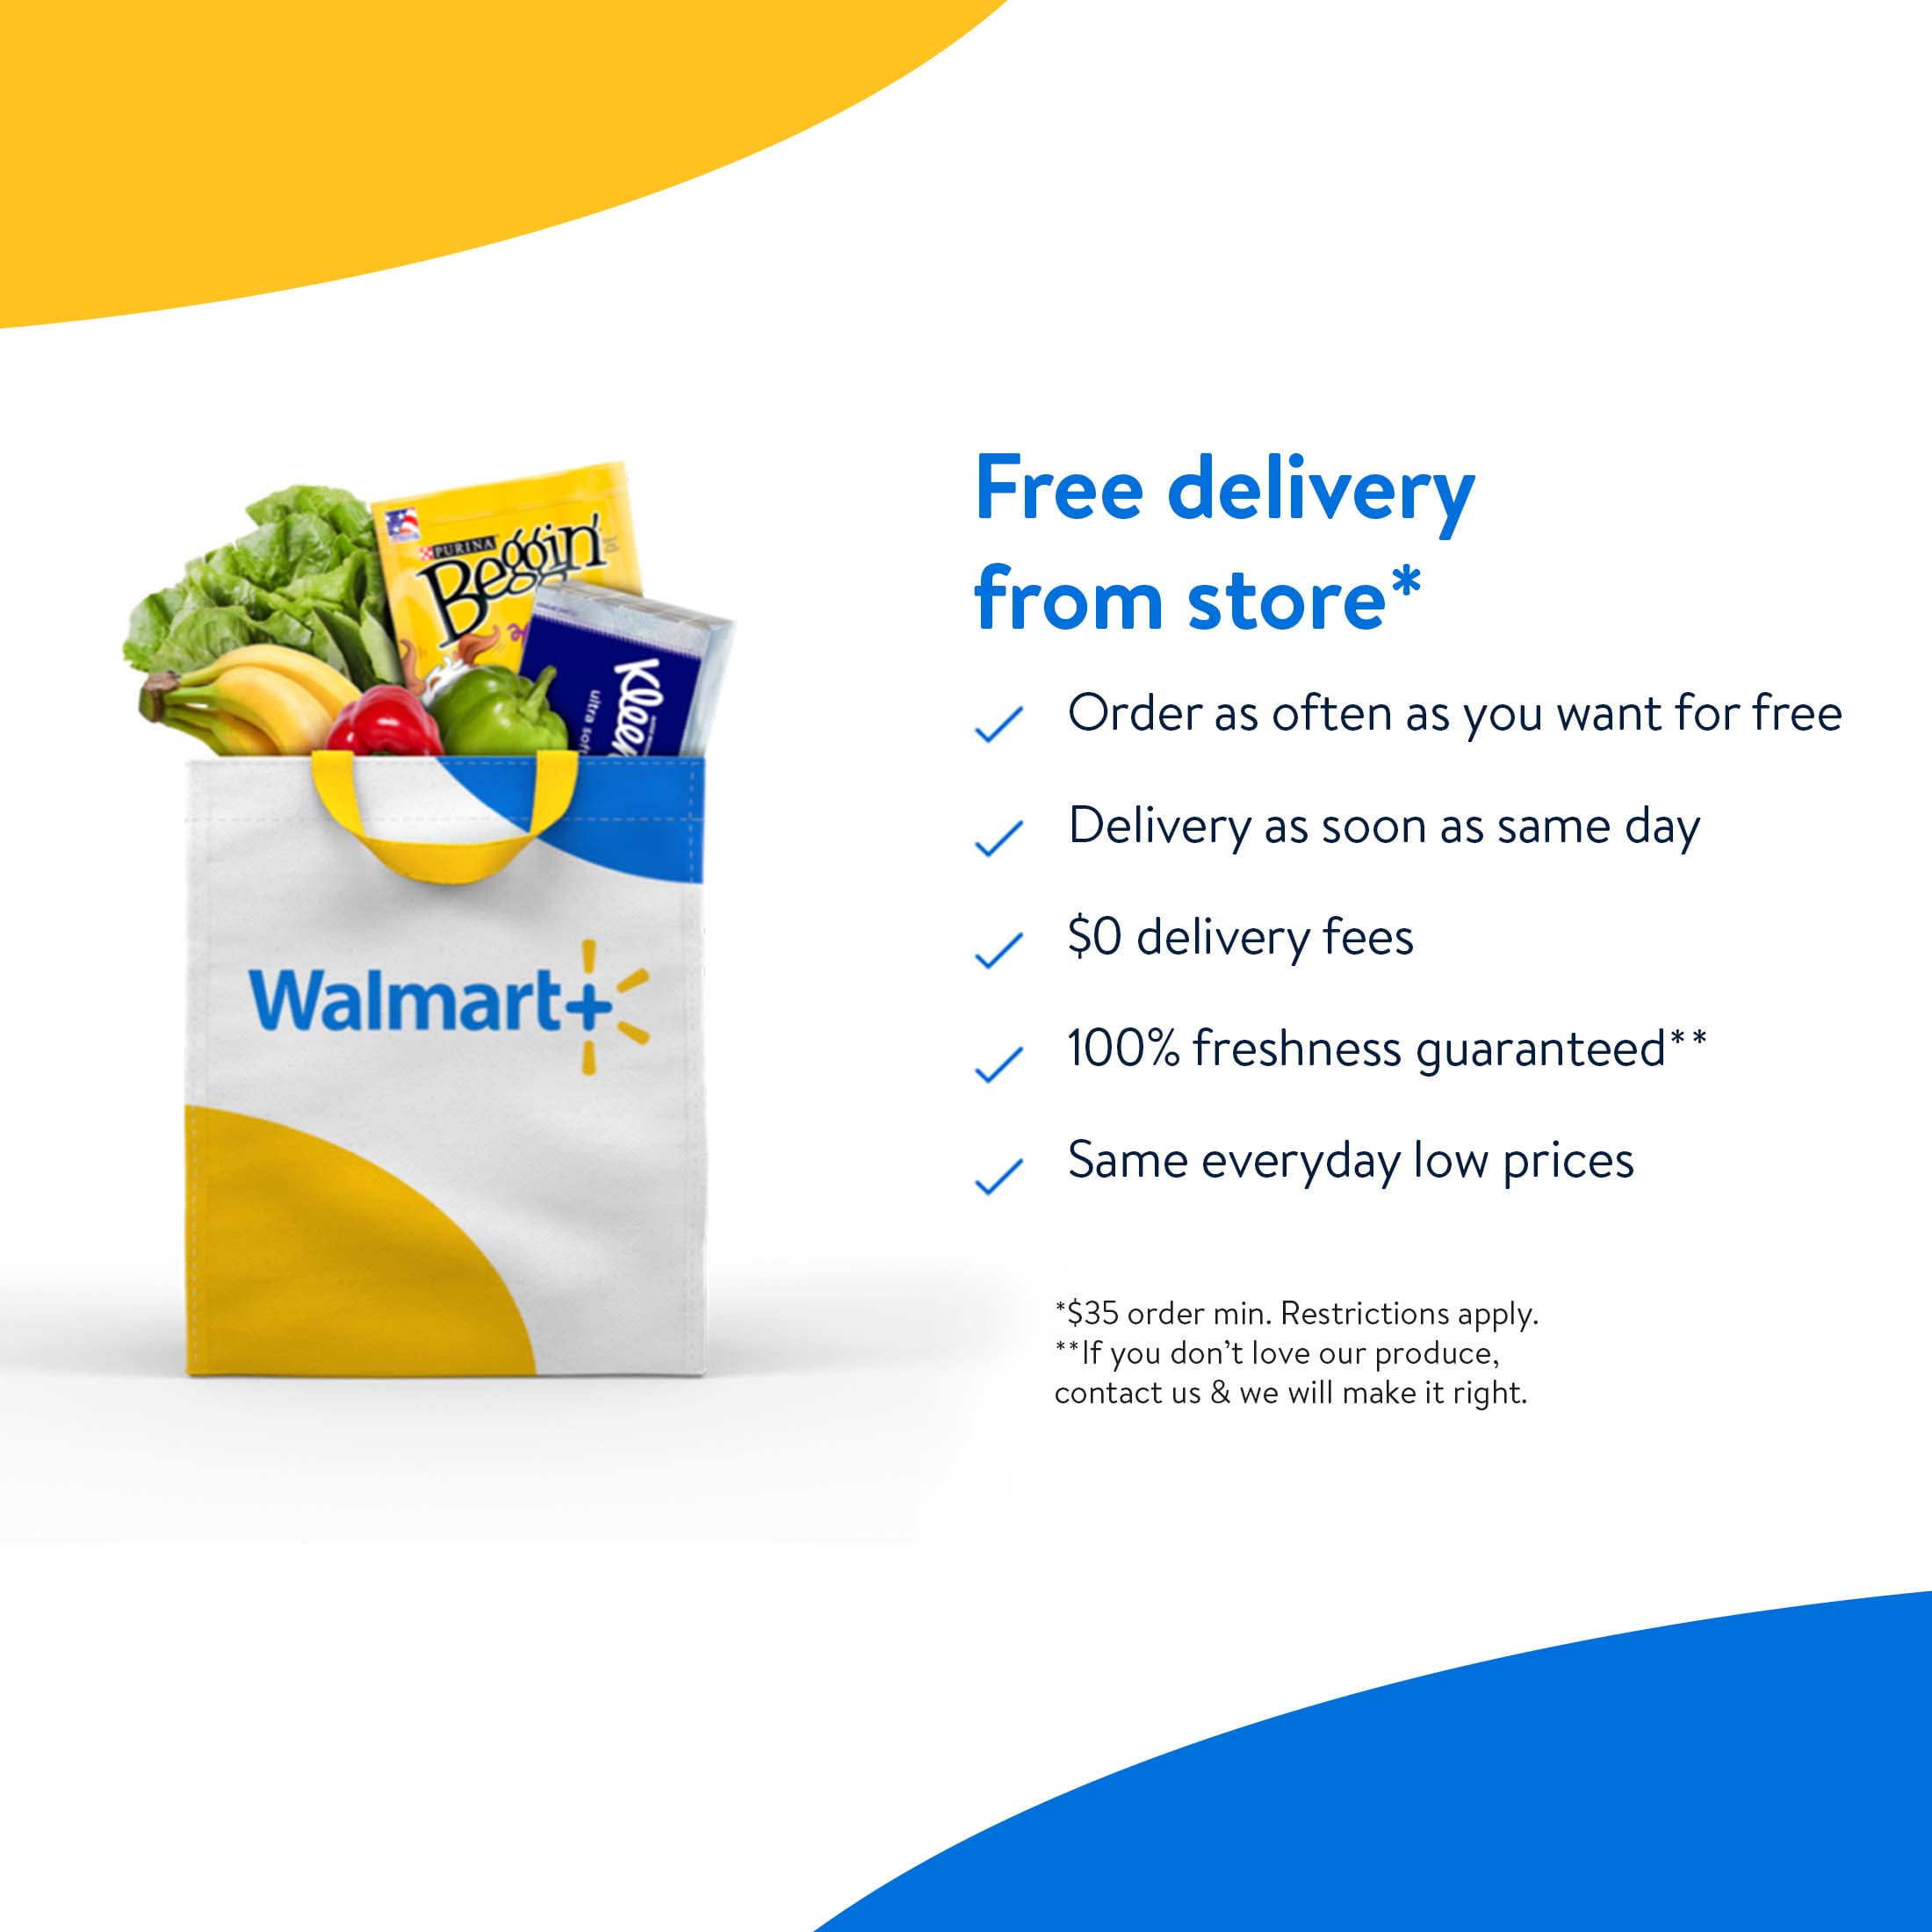 Walmart to offer free next-day shipping, beginning this week – The